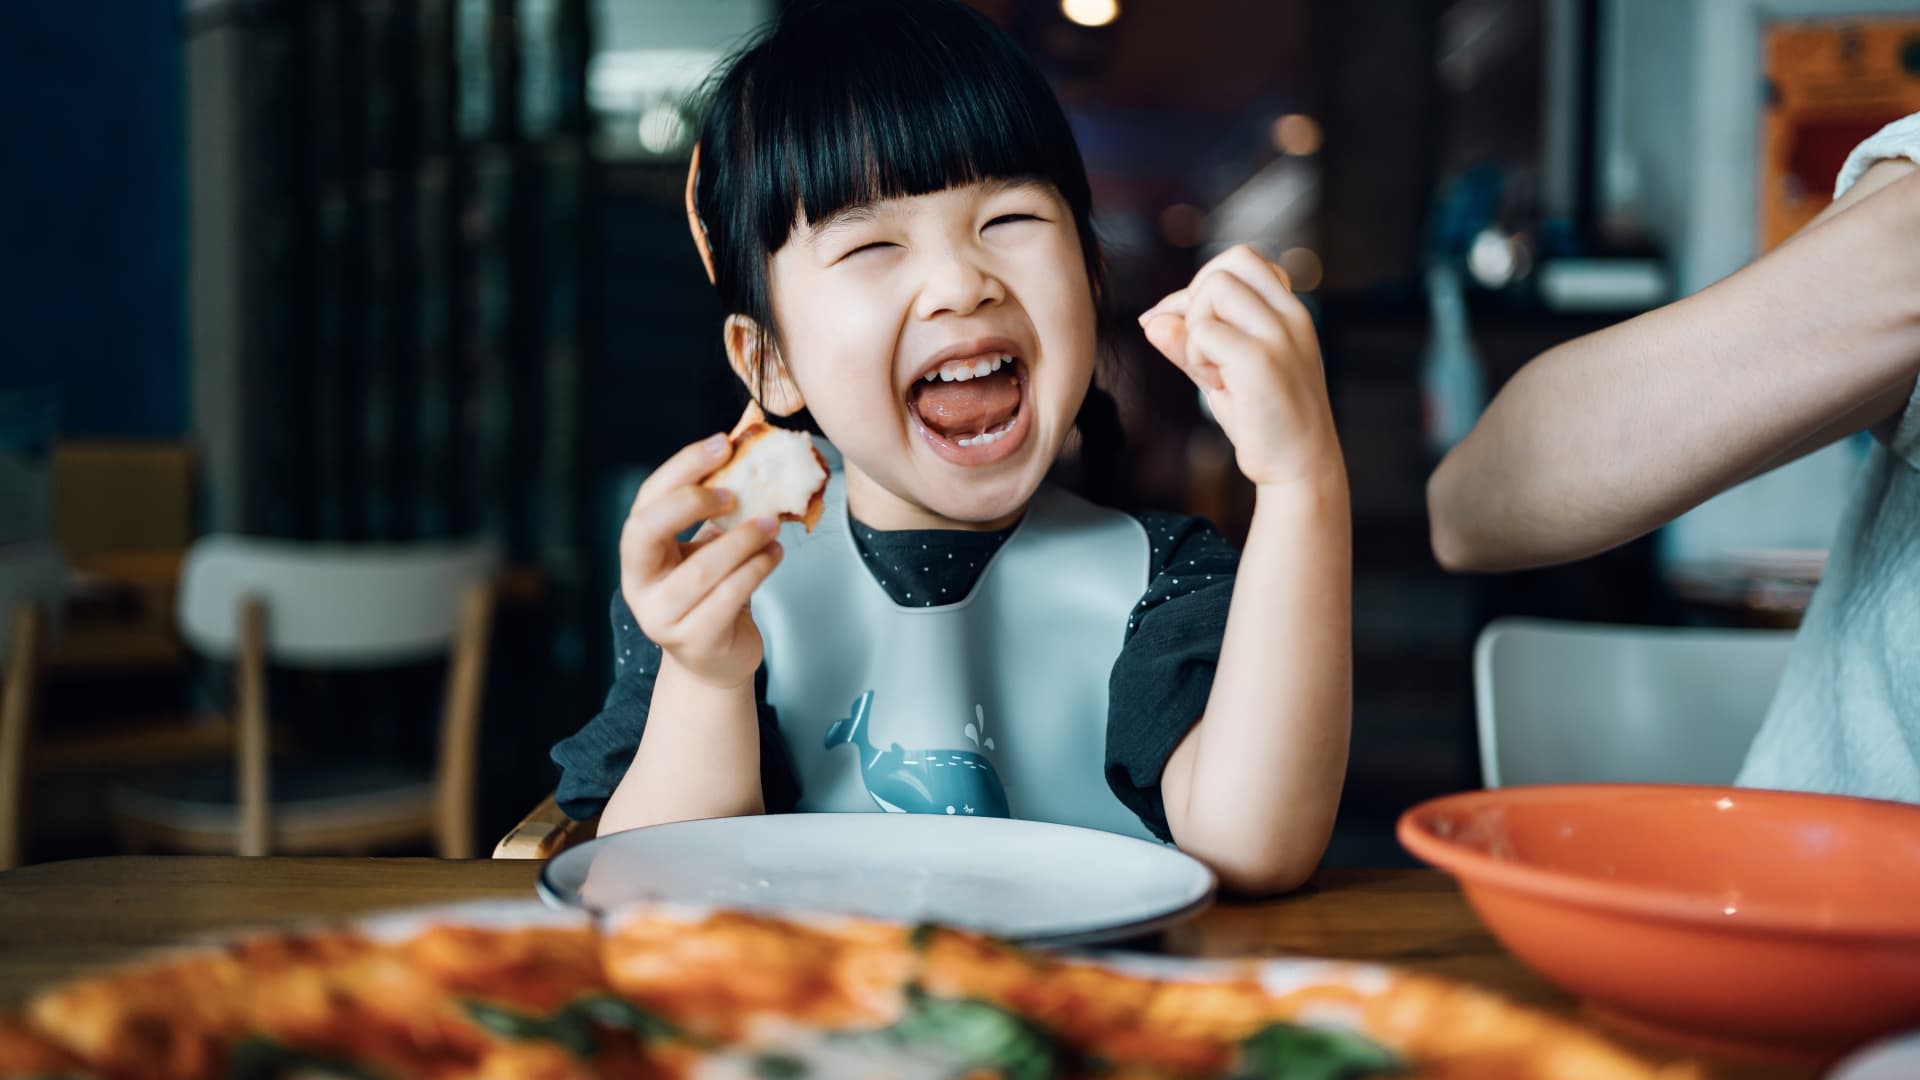 Never use these 4 'toxic' food phrases if your kid is a picky eater, says parenting expert and dietitian